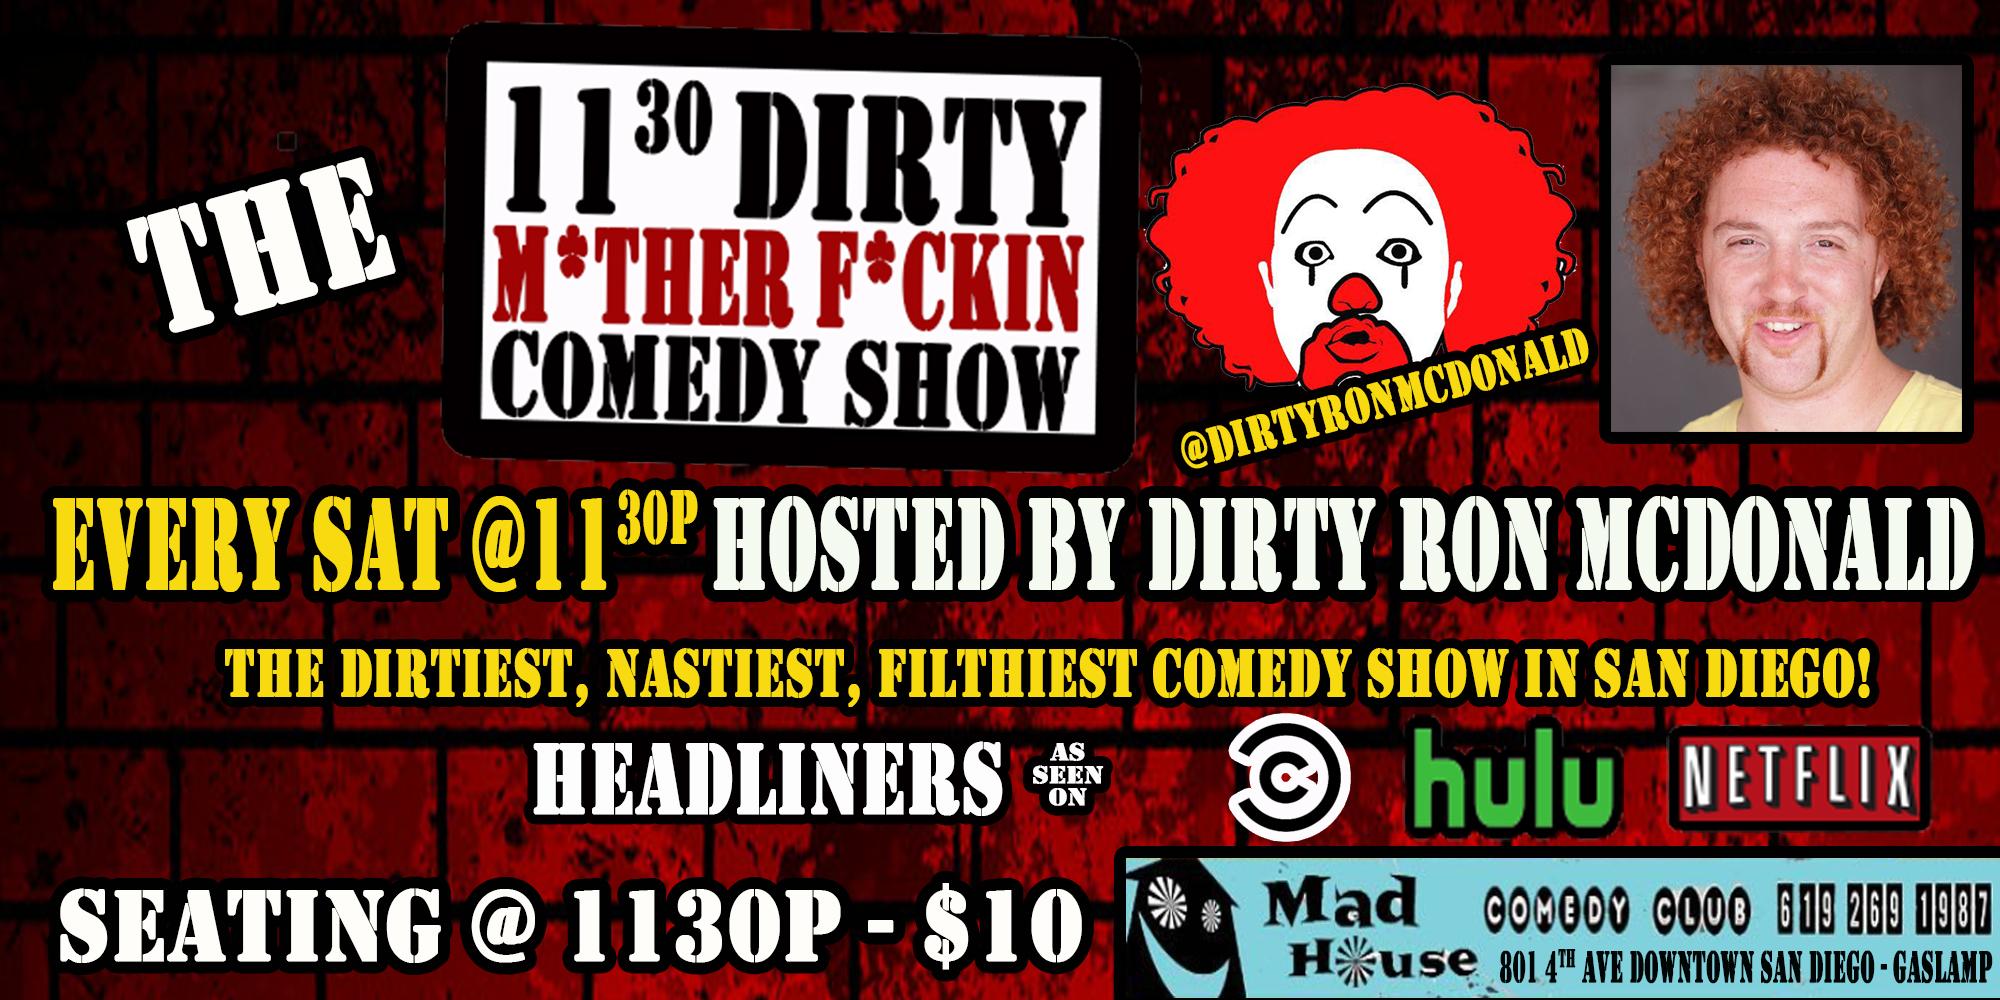 The Dirty Show! Every Saturday Night Hosted by Dirty Ron McDonald!